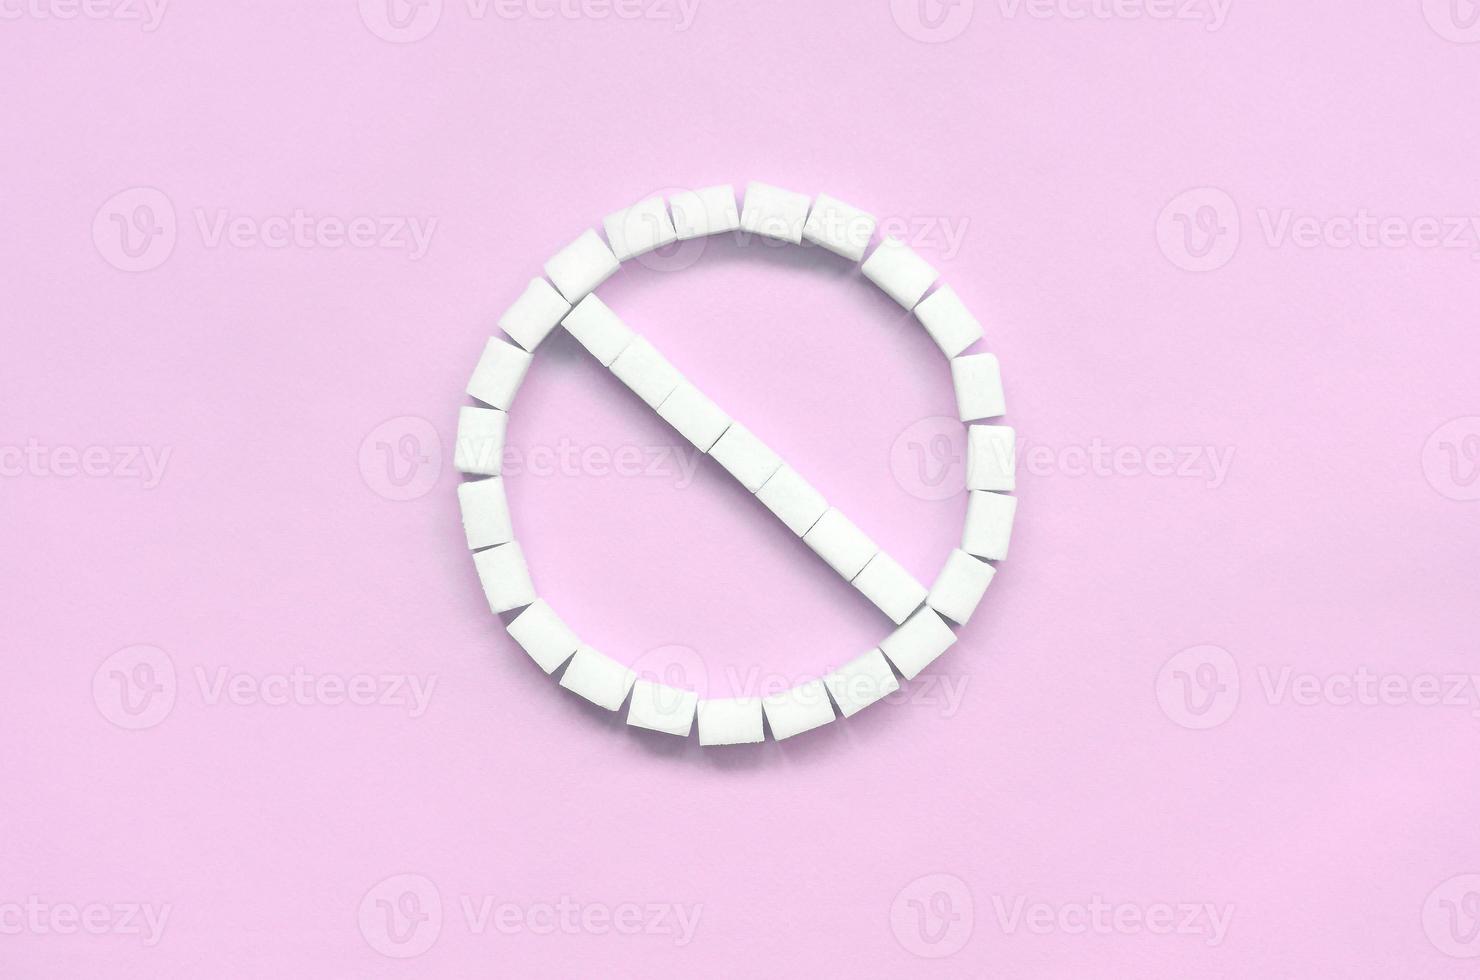 Sign of the ban of sugar cubes on a pastel pink background photo